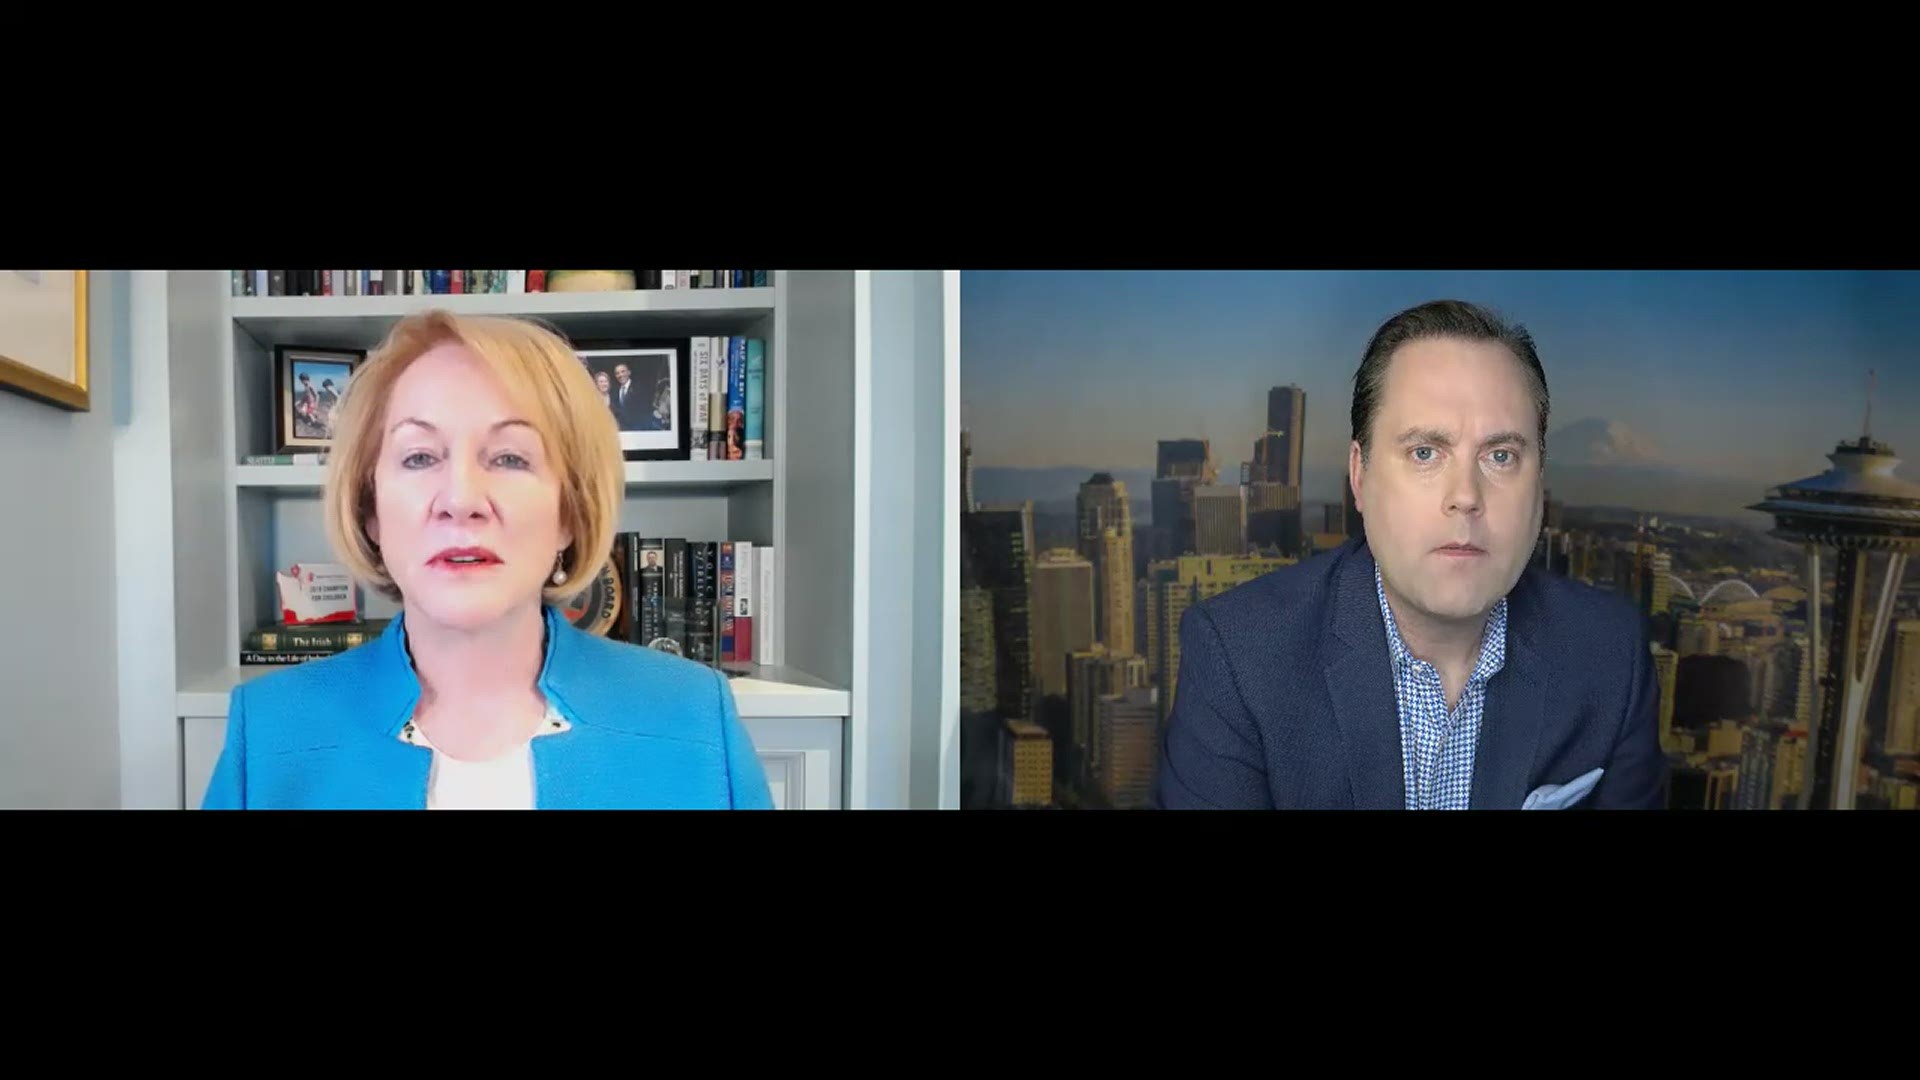 Seattle Mayor Jenny Durkan spoke with KING 5’s Chris Daniels about why she will not seek re-election for a second term.